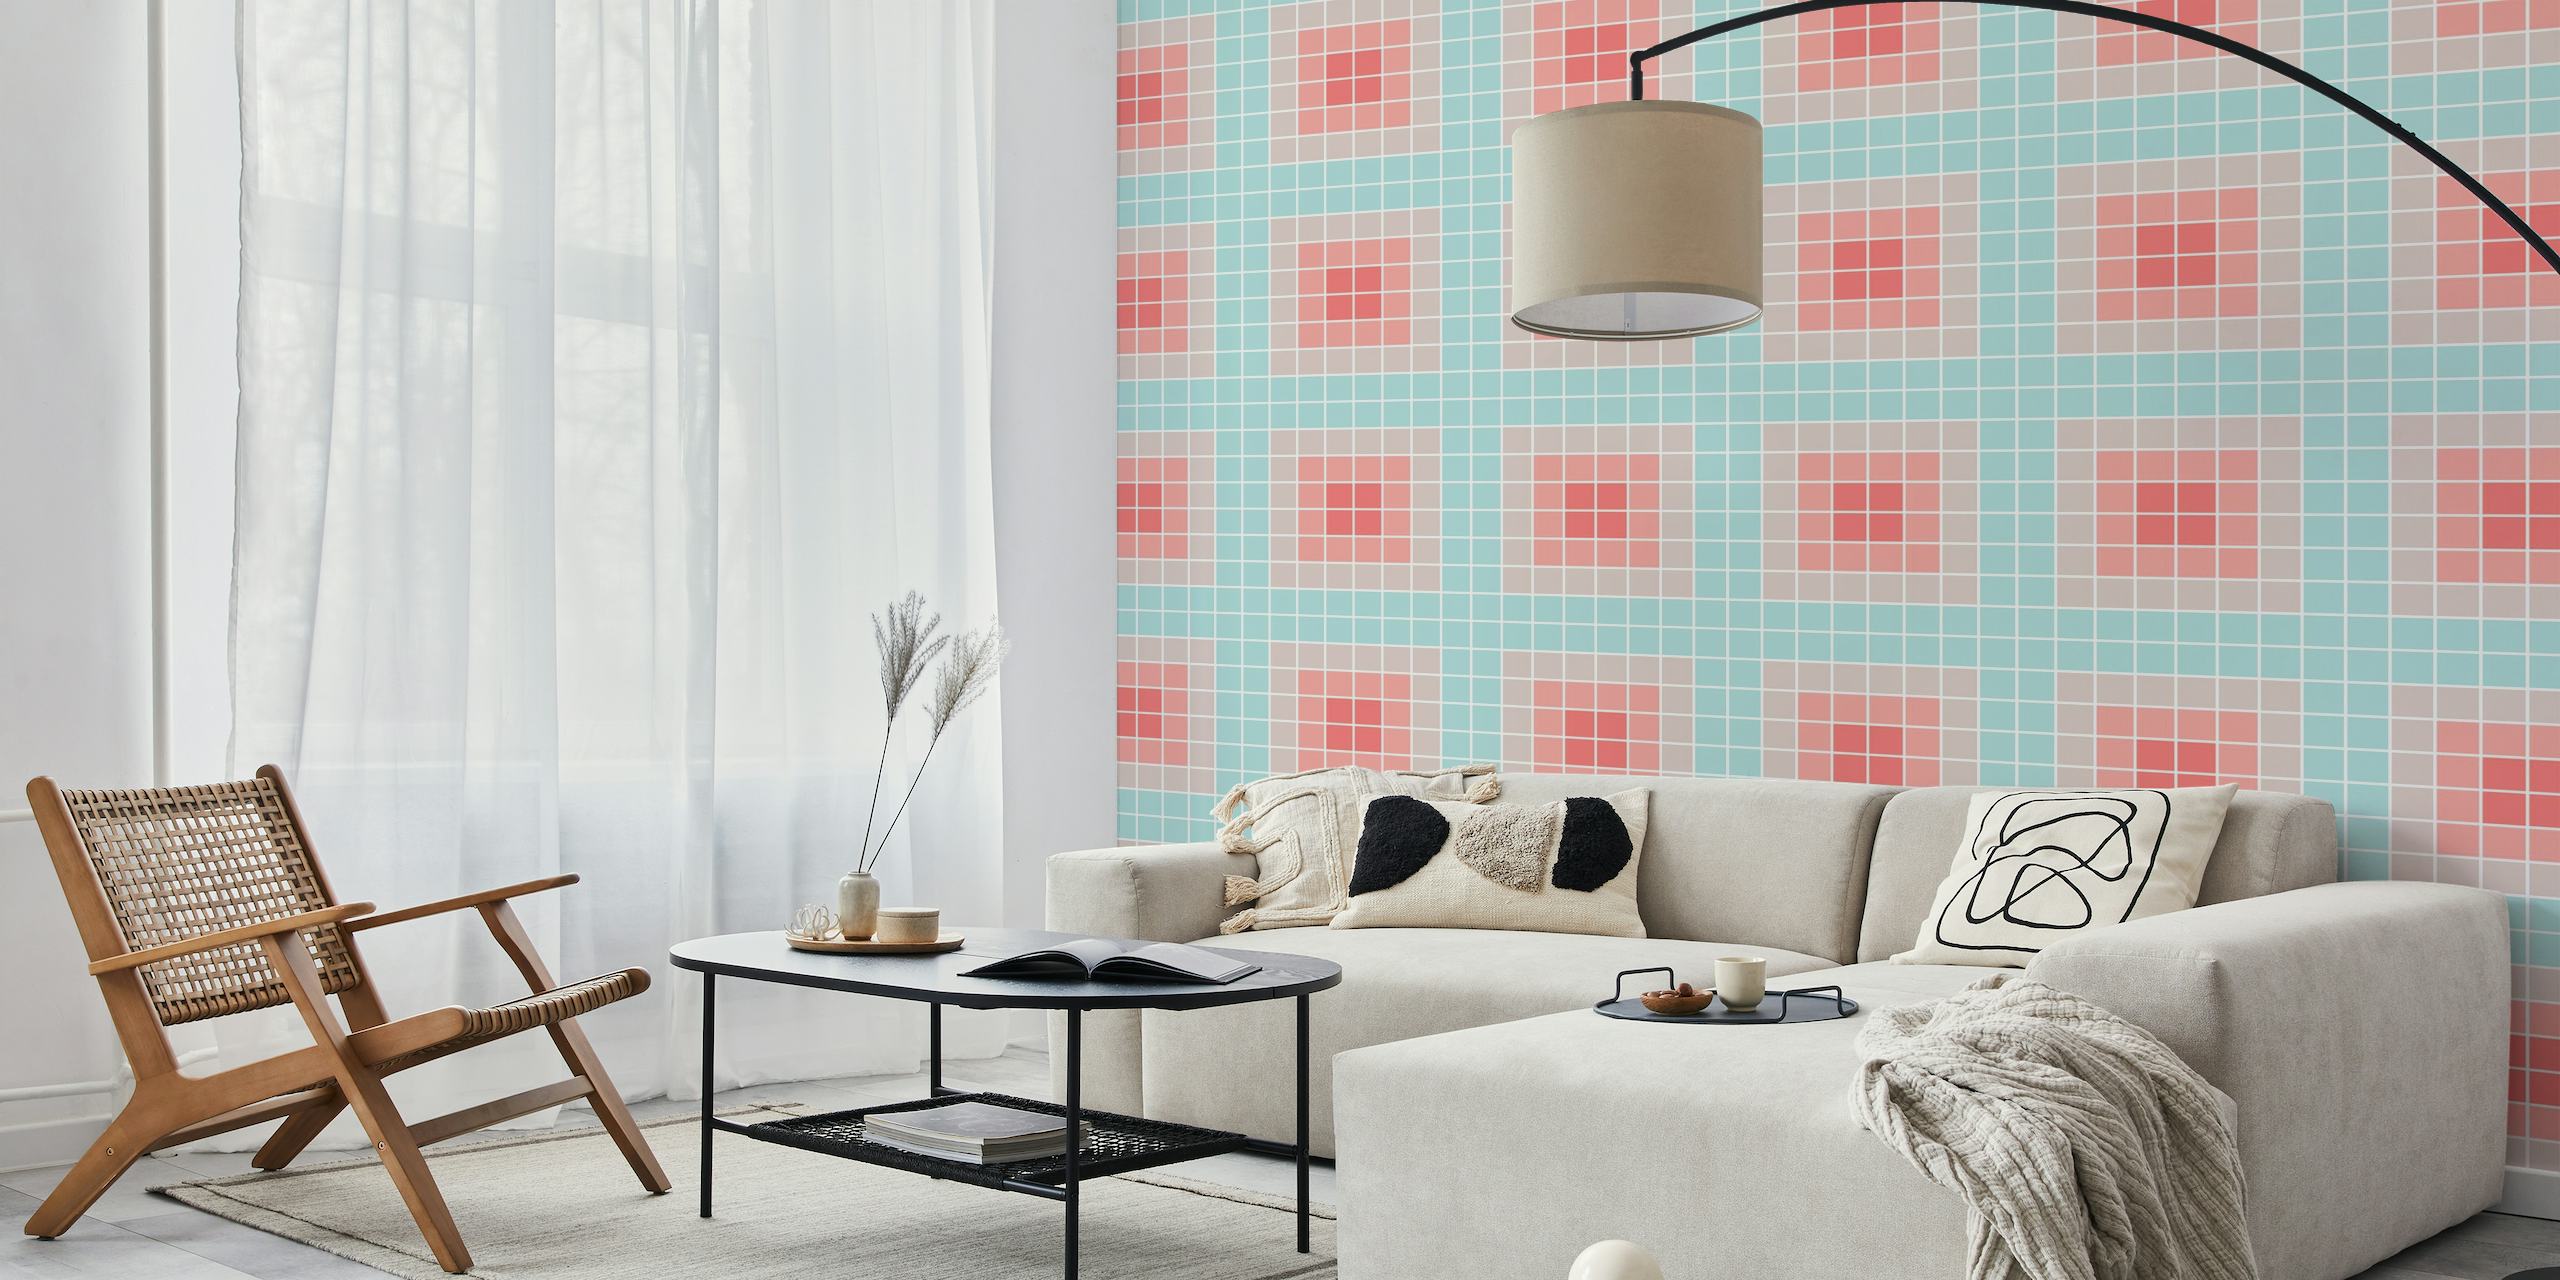 Retro-inspired '70s Gradient Squares 1' wall mural featuring a pattern of coral and aqua squares.